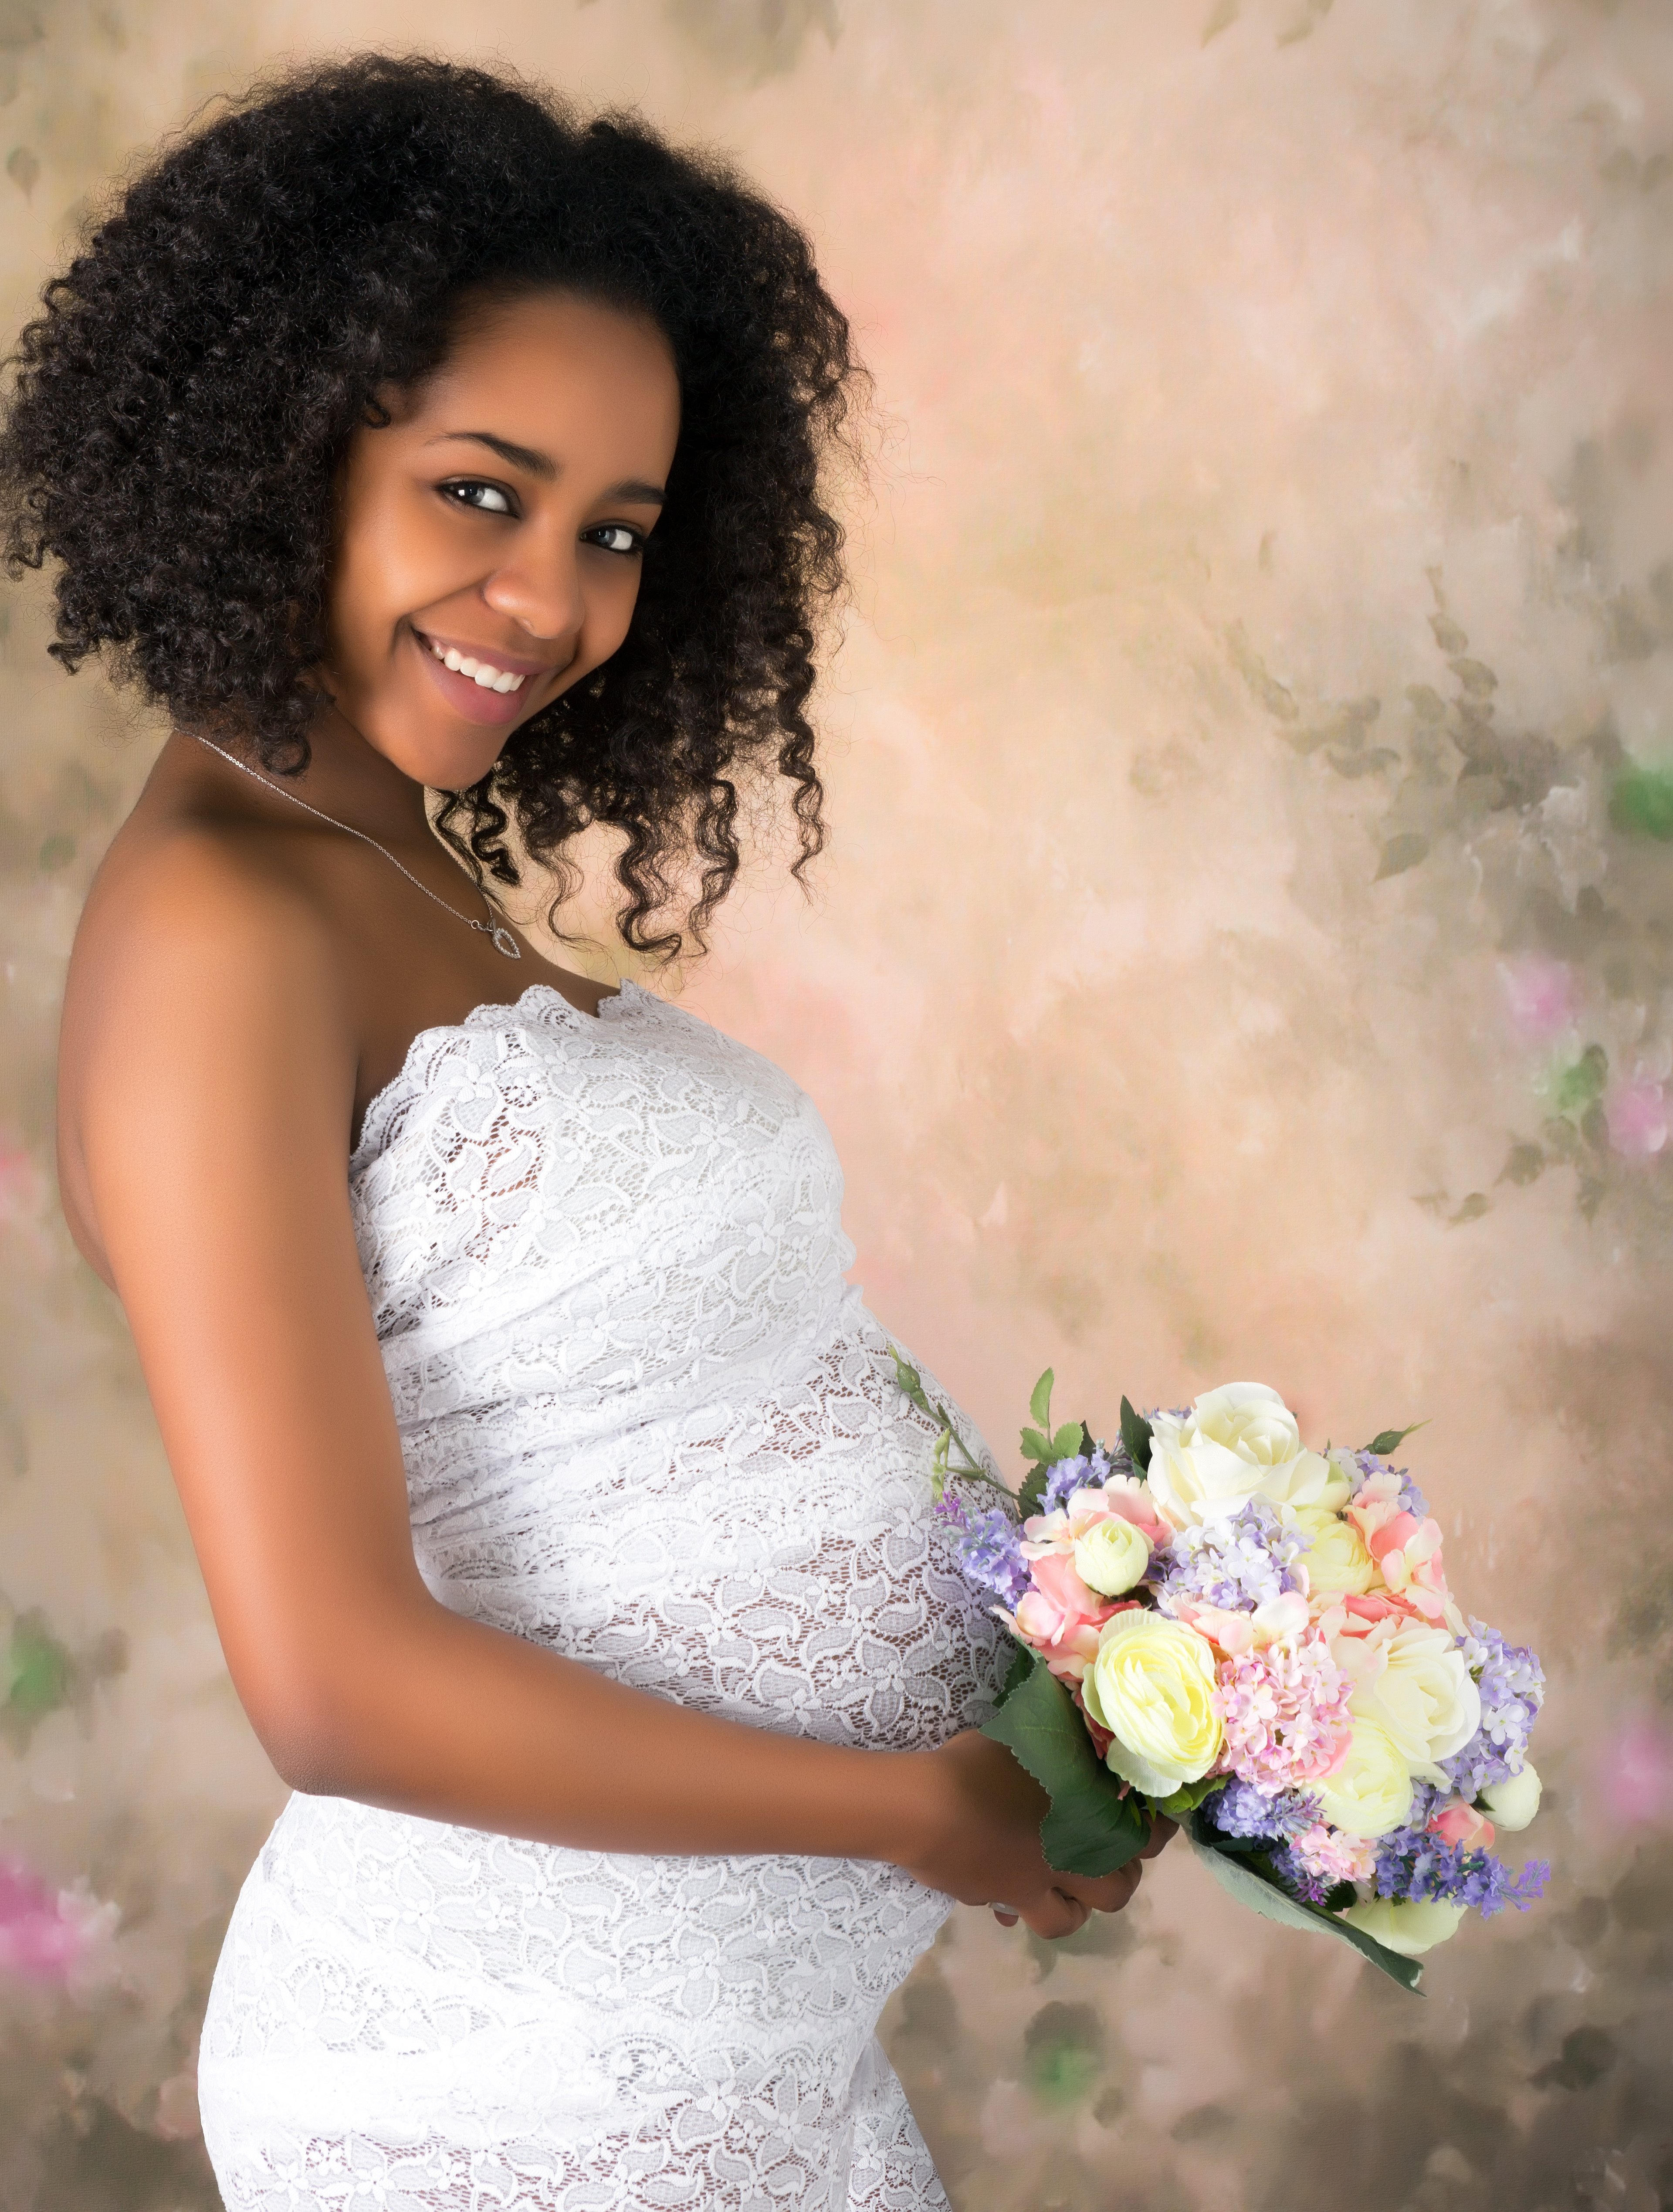 Pregnant wife looking into camera and smiling | Photo: Shutterstock